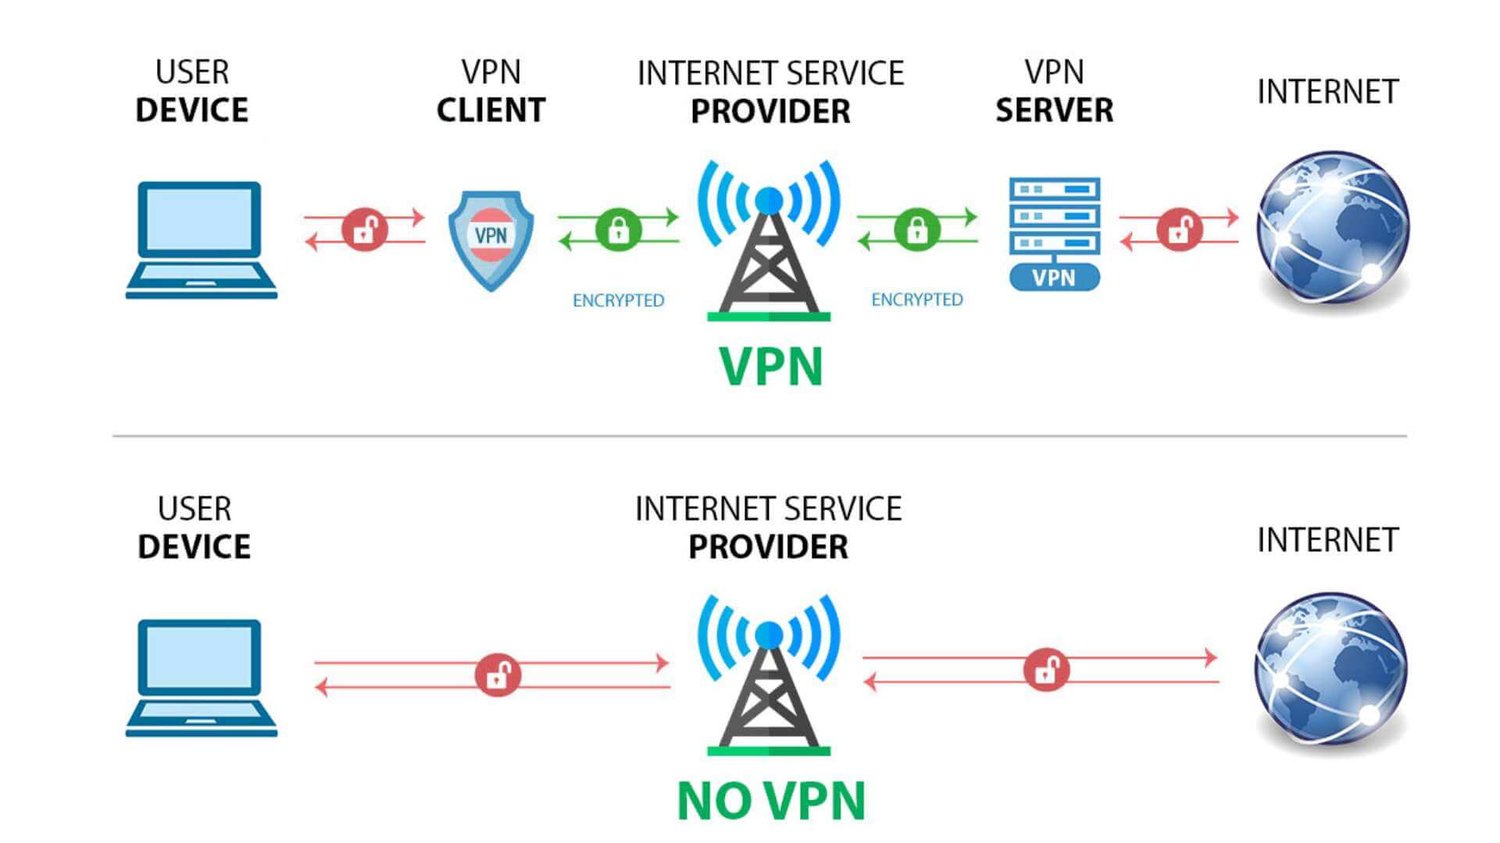 how does a vpn work, with a vpn, without a vpn